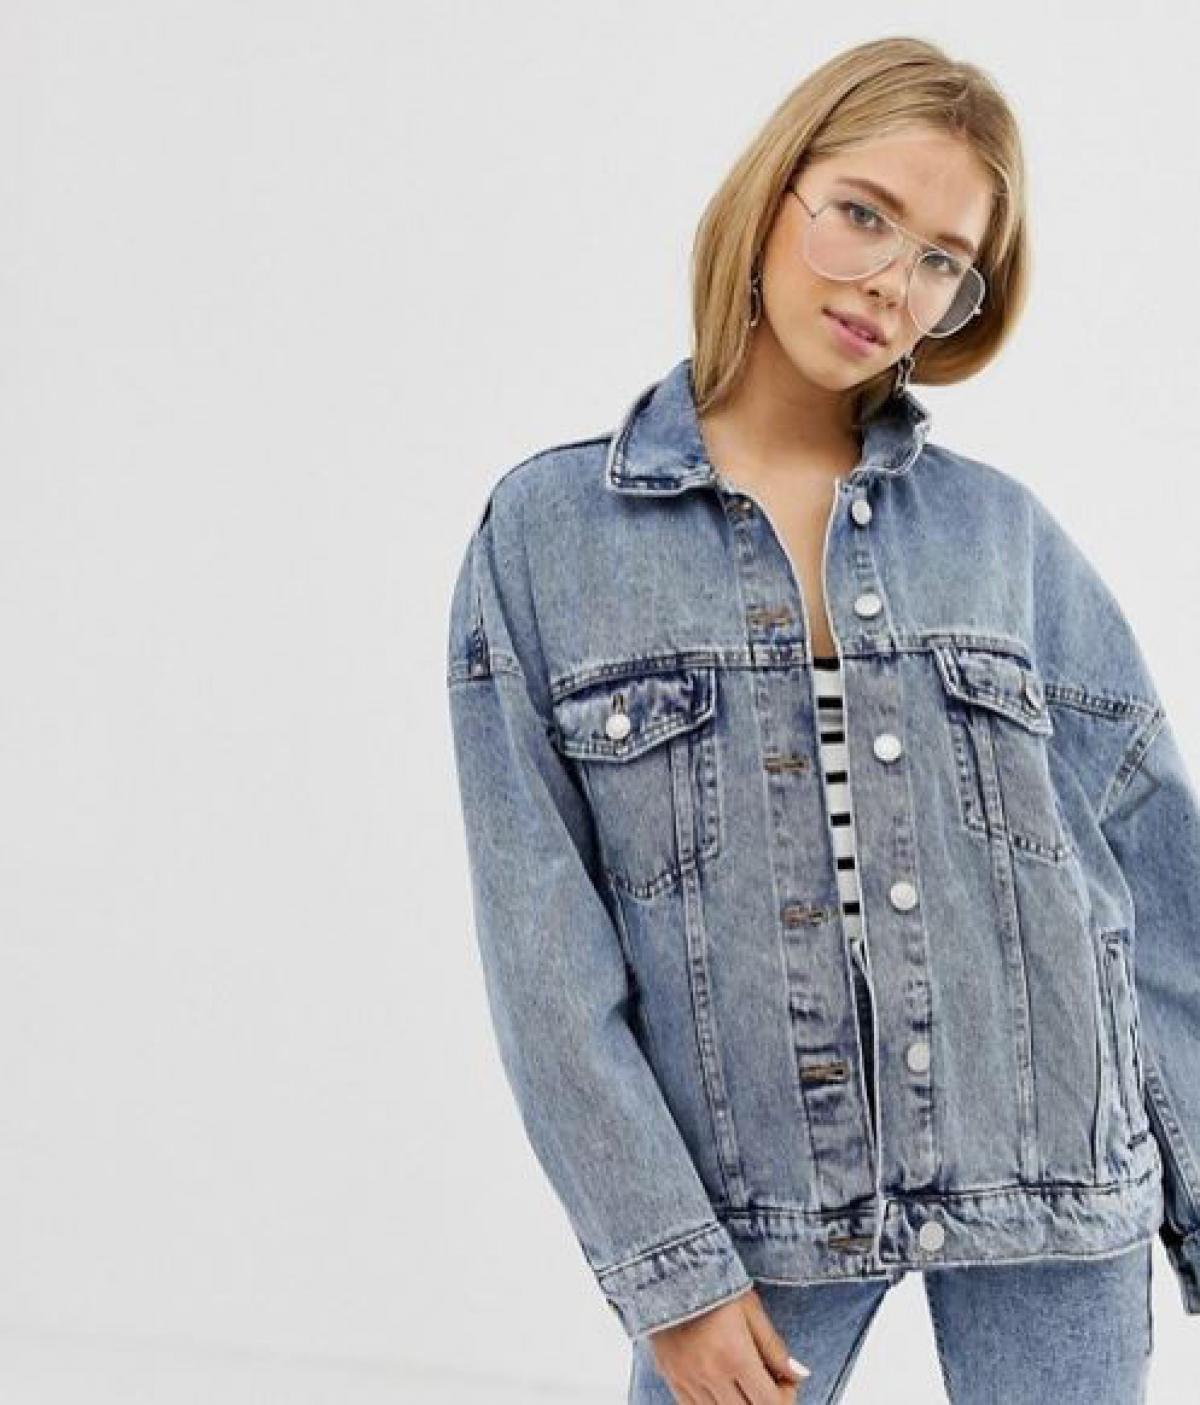 Trend 2: Big and baggy - the denim jacket